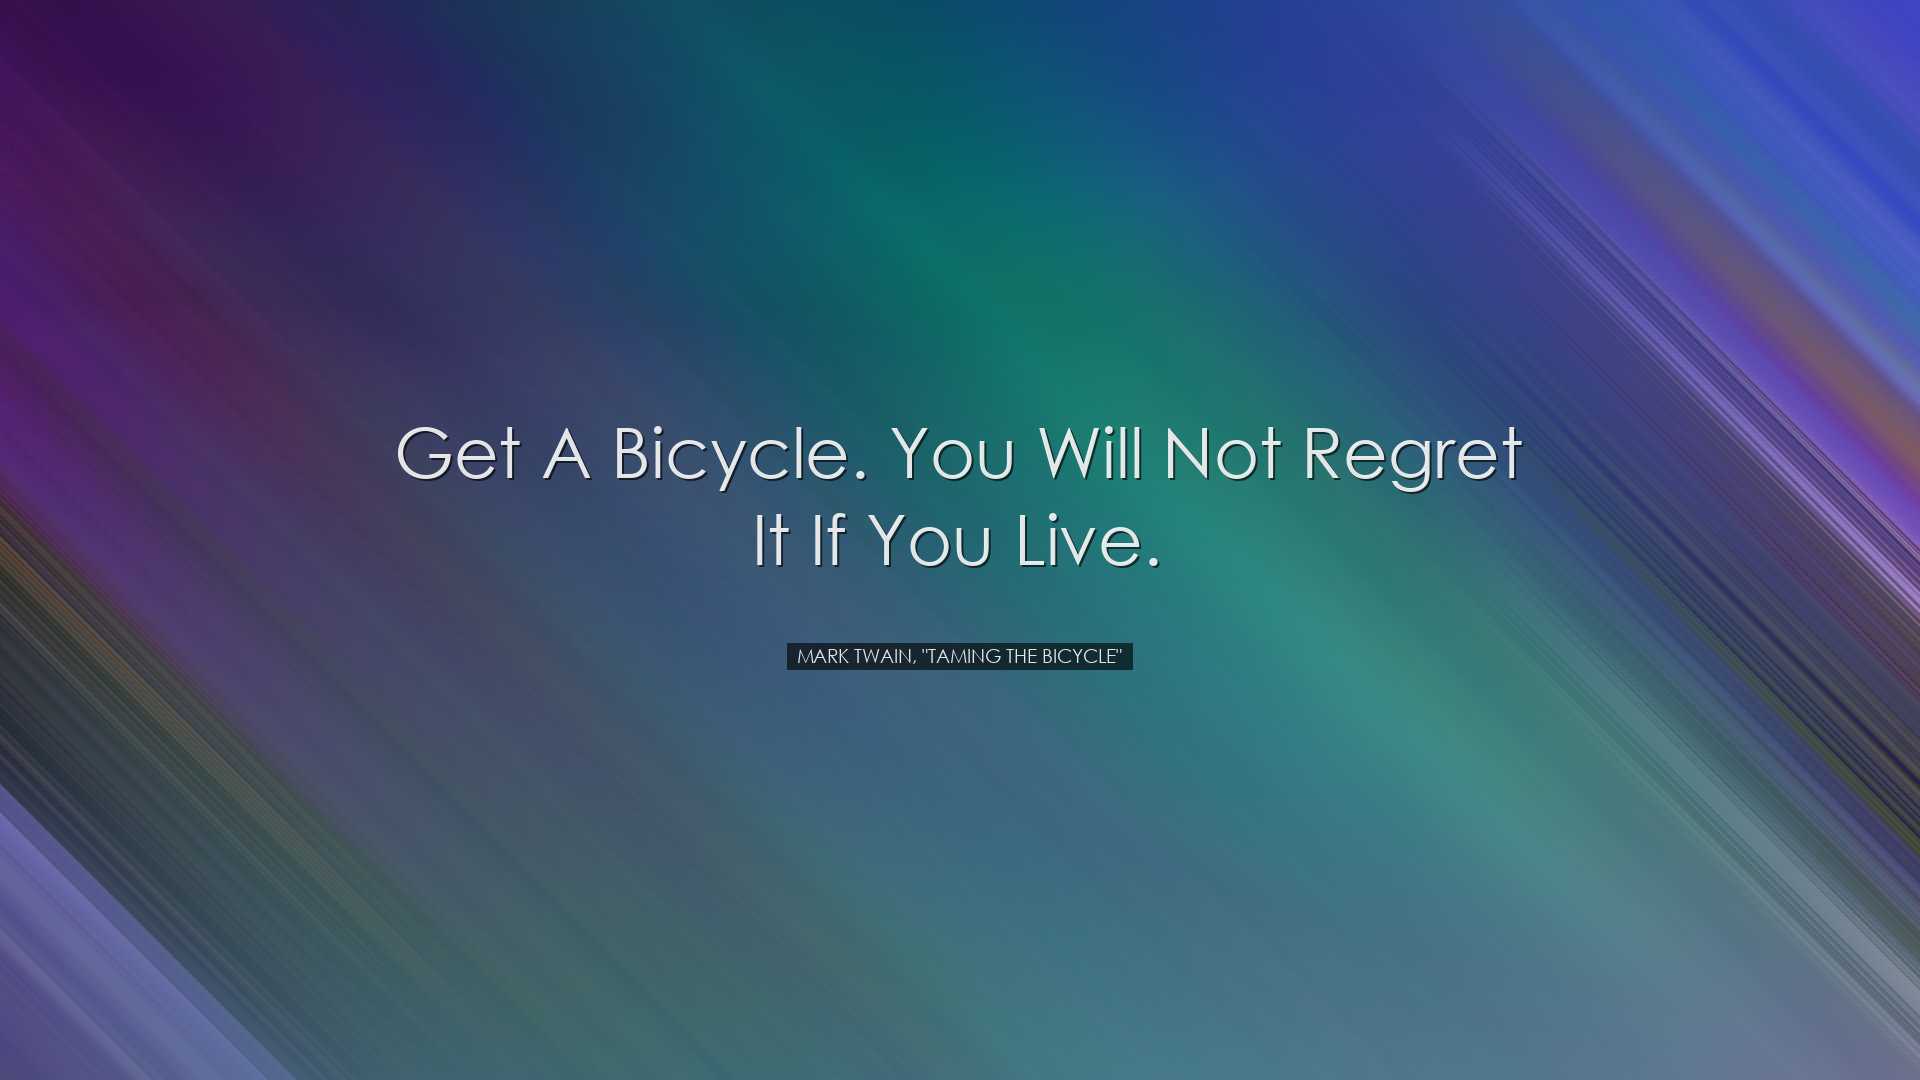 Get a bicycle. You will not regret it if you live. - Mark Twain, 